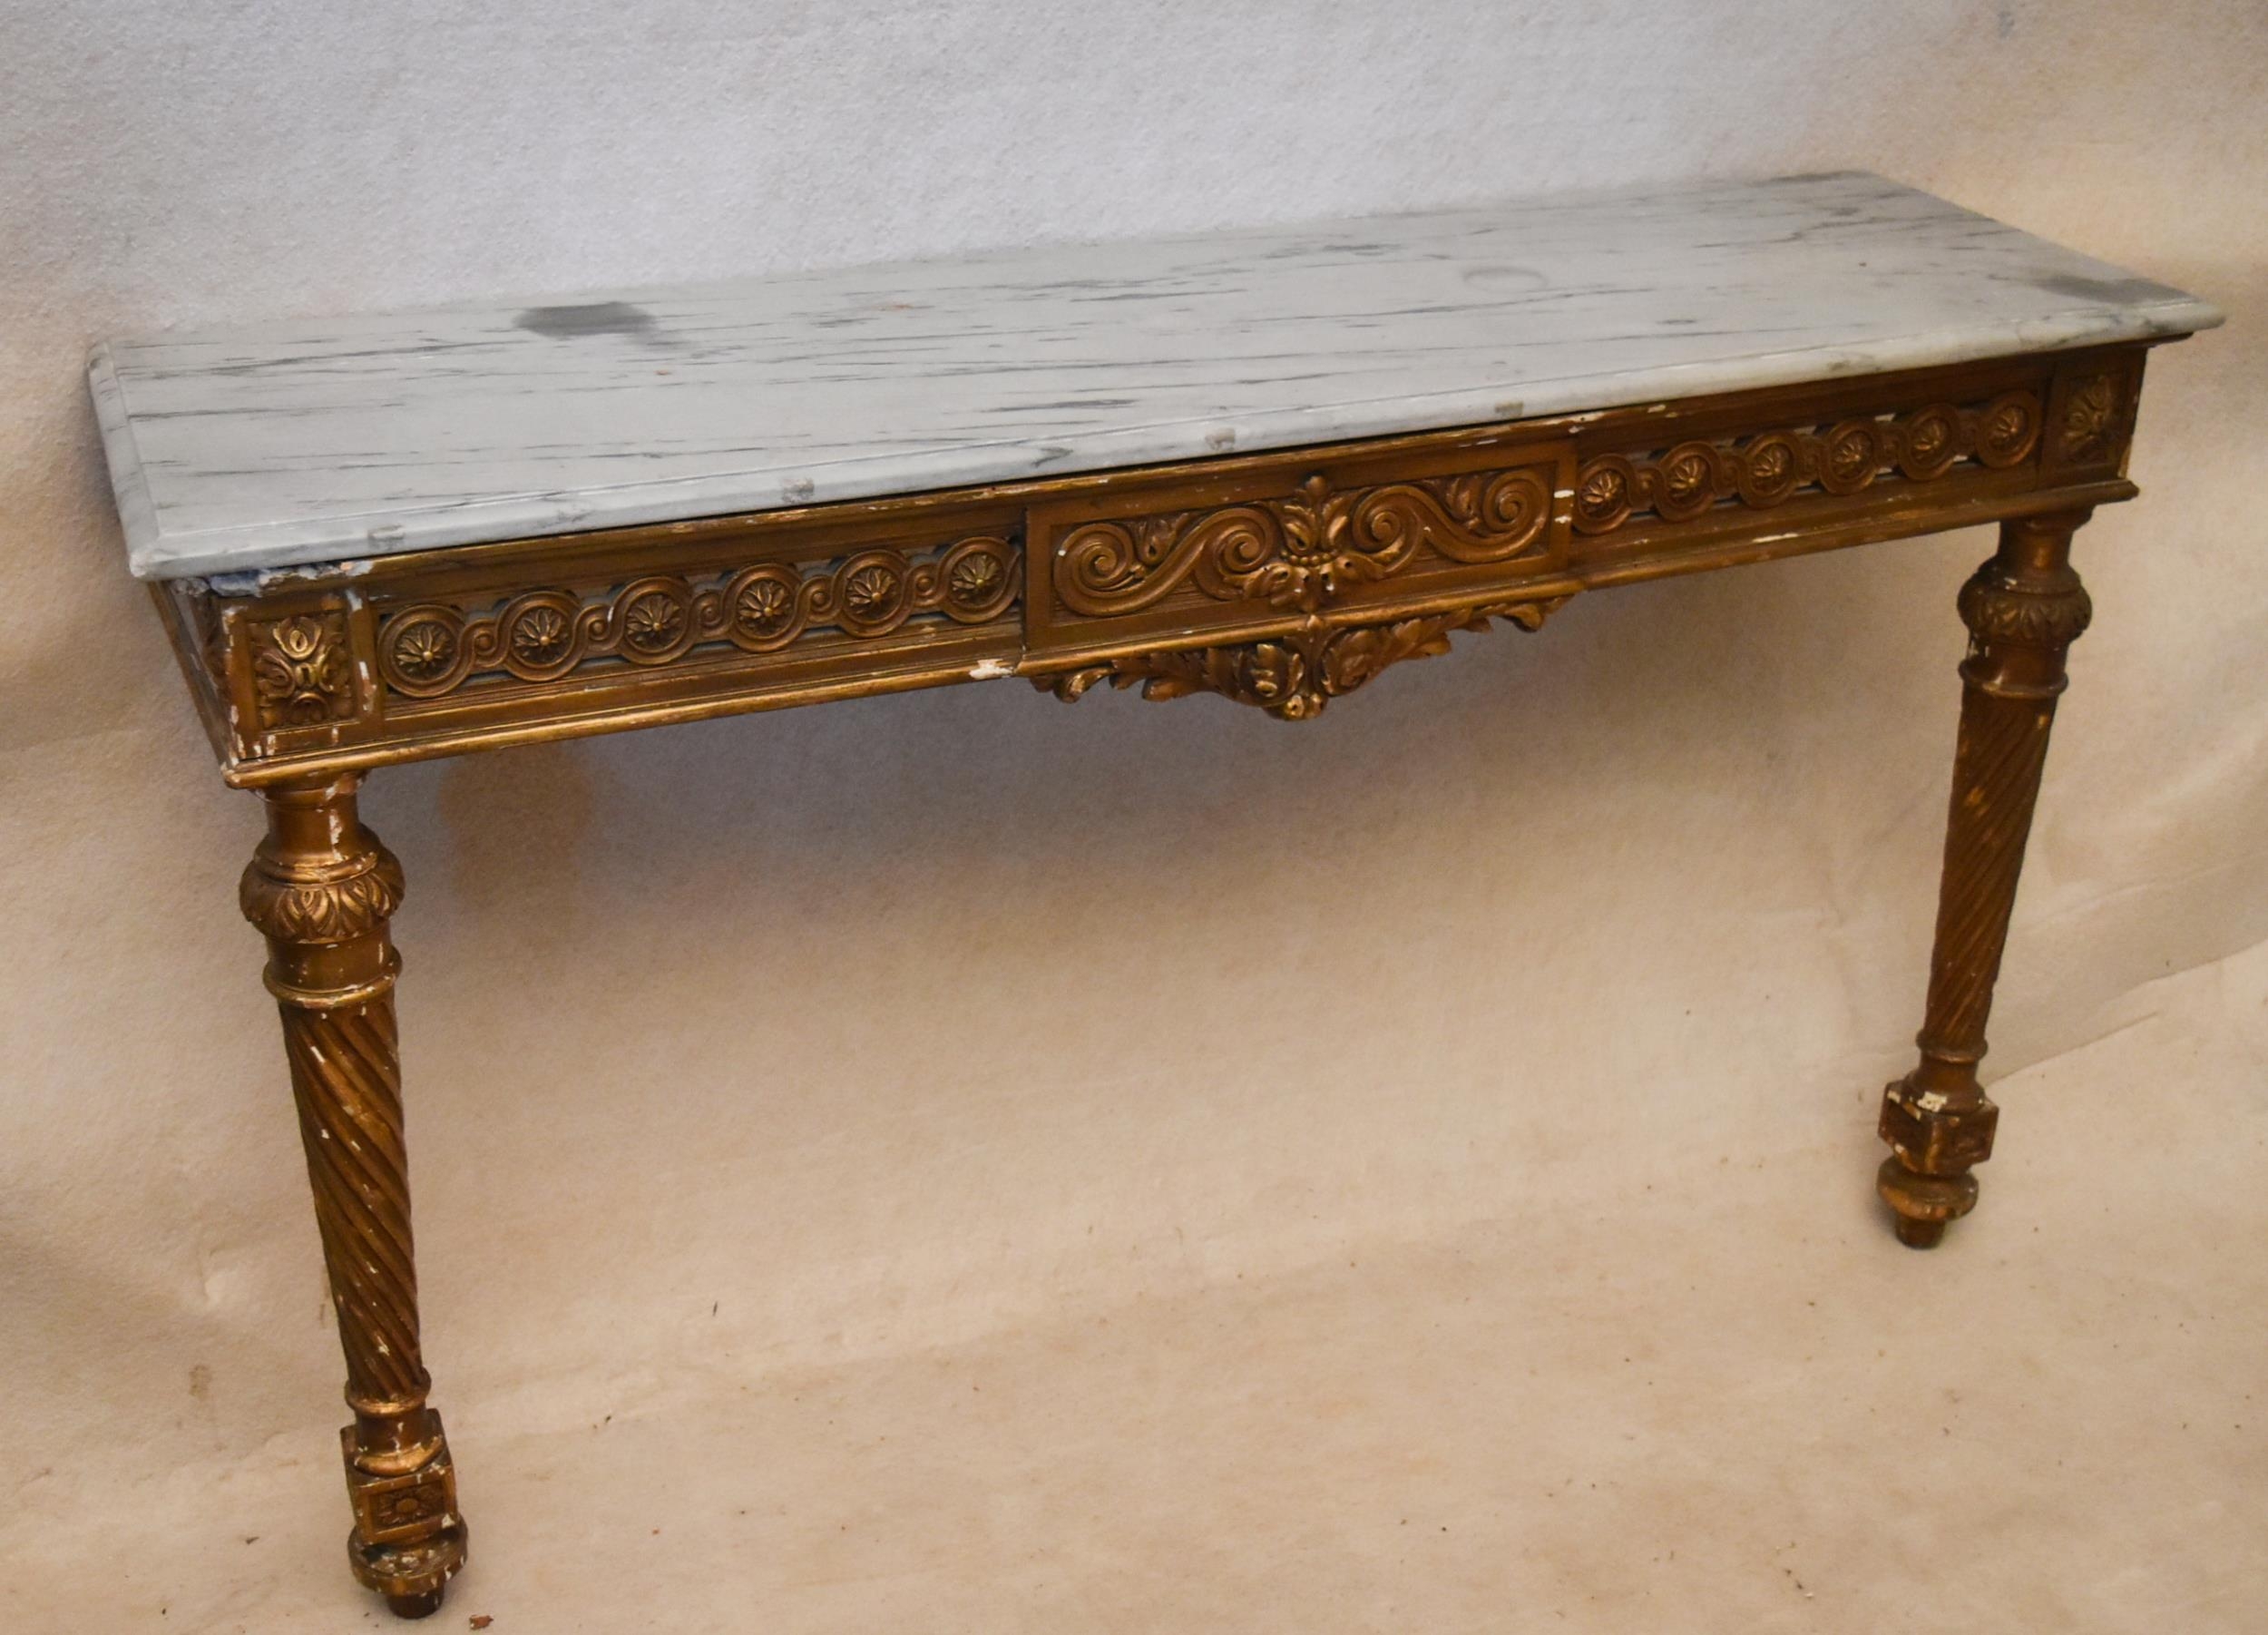 A 19th century Continental giltwood console table, the rectangular marble top with a moulded edge - Image 3 of 7